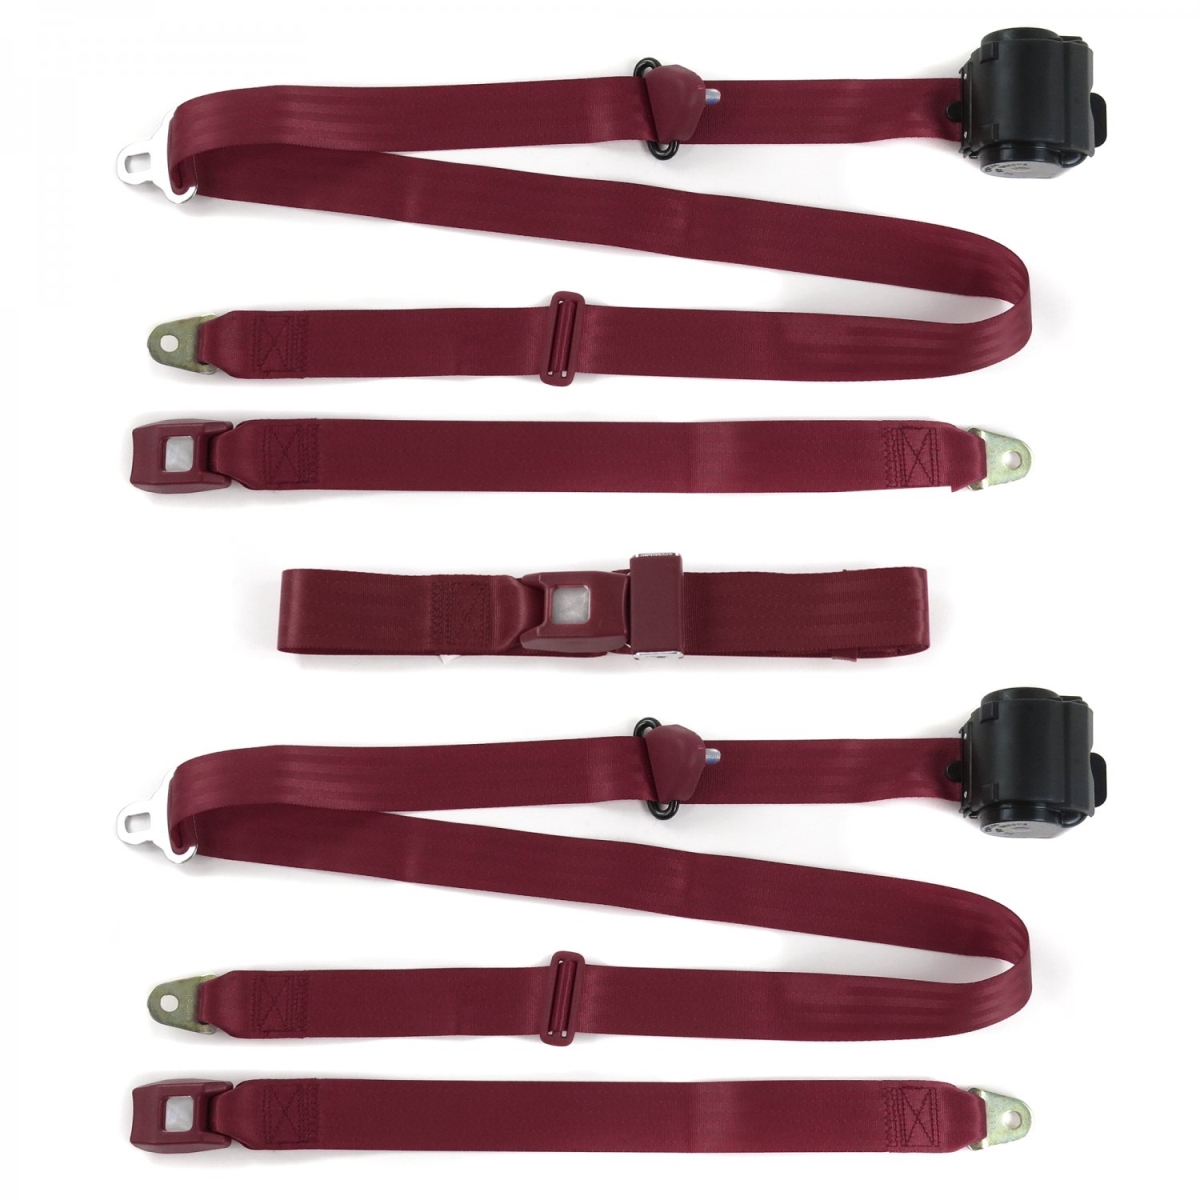 672111 3 Point Standard Retractable Bench Seat Belt Kit with 3 Belts for 1955-1957 Ford Thunderbird, Burgundy -  safeTboy